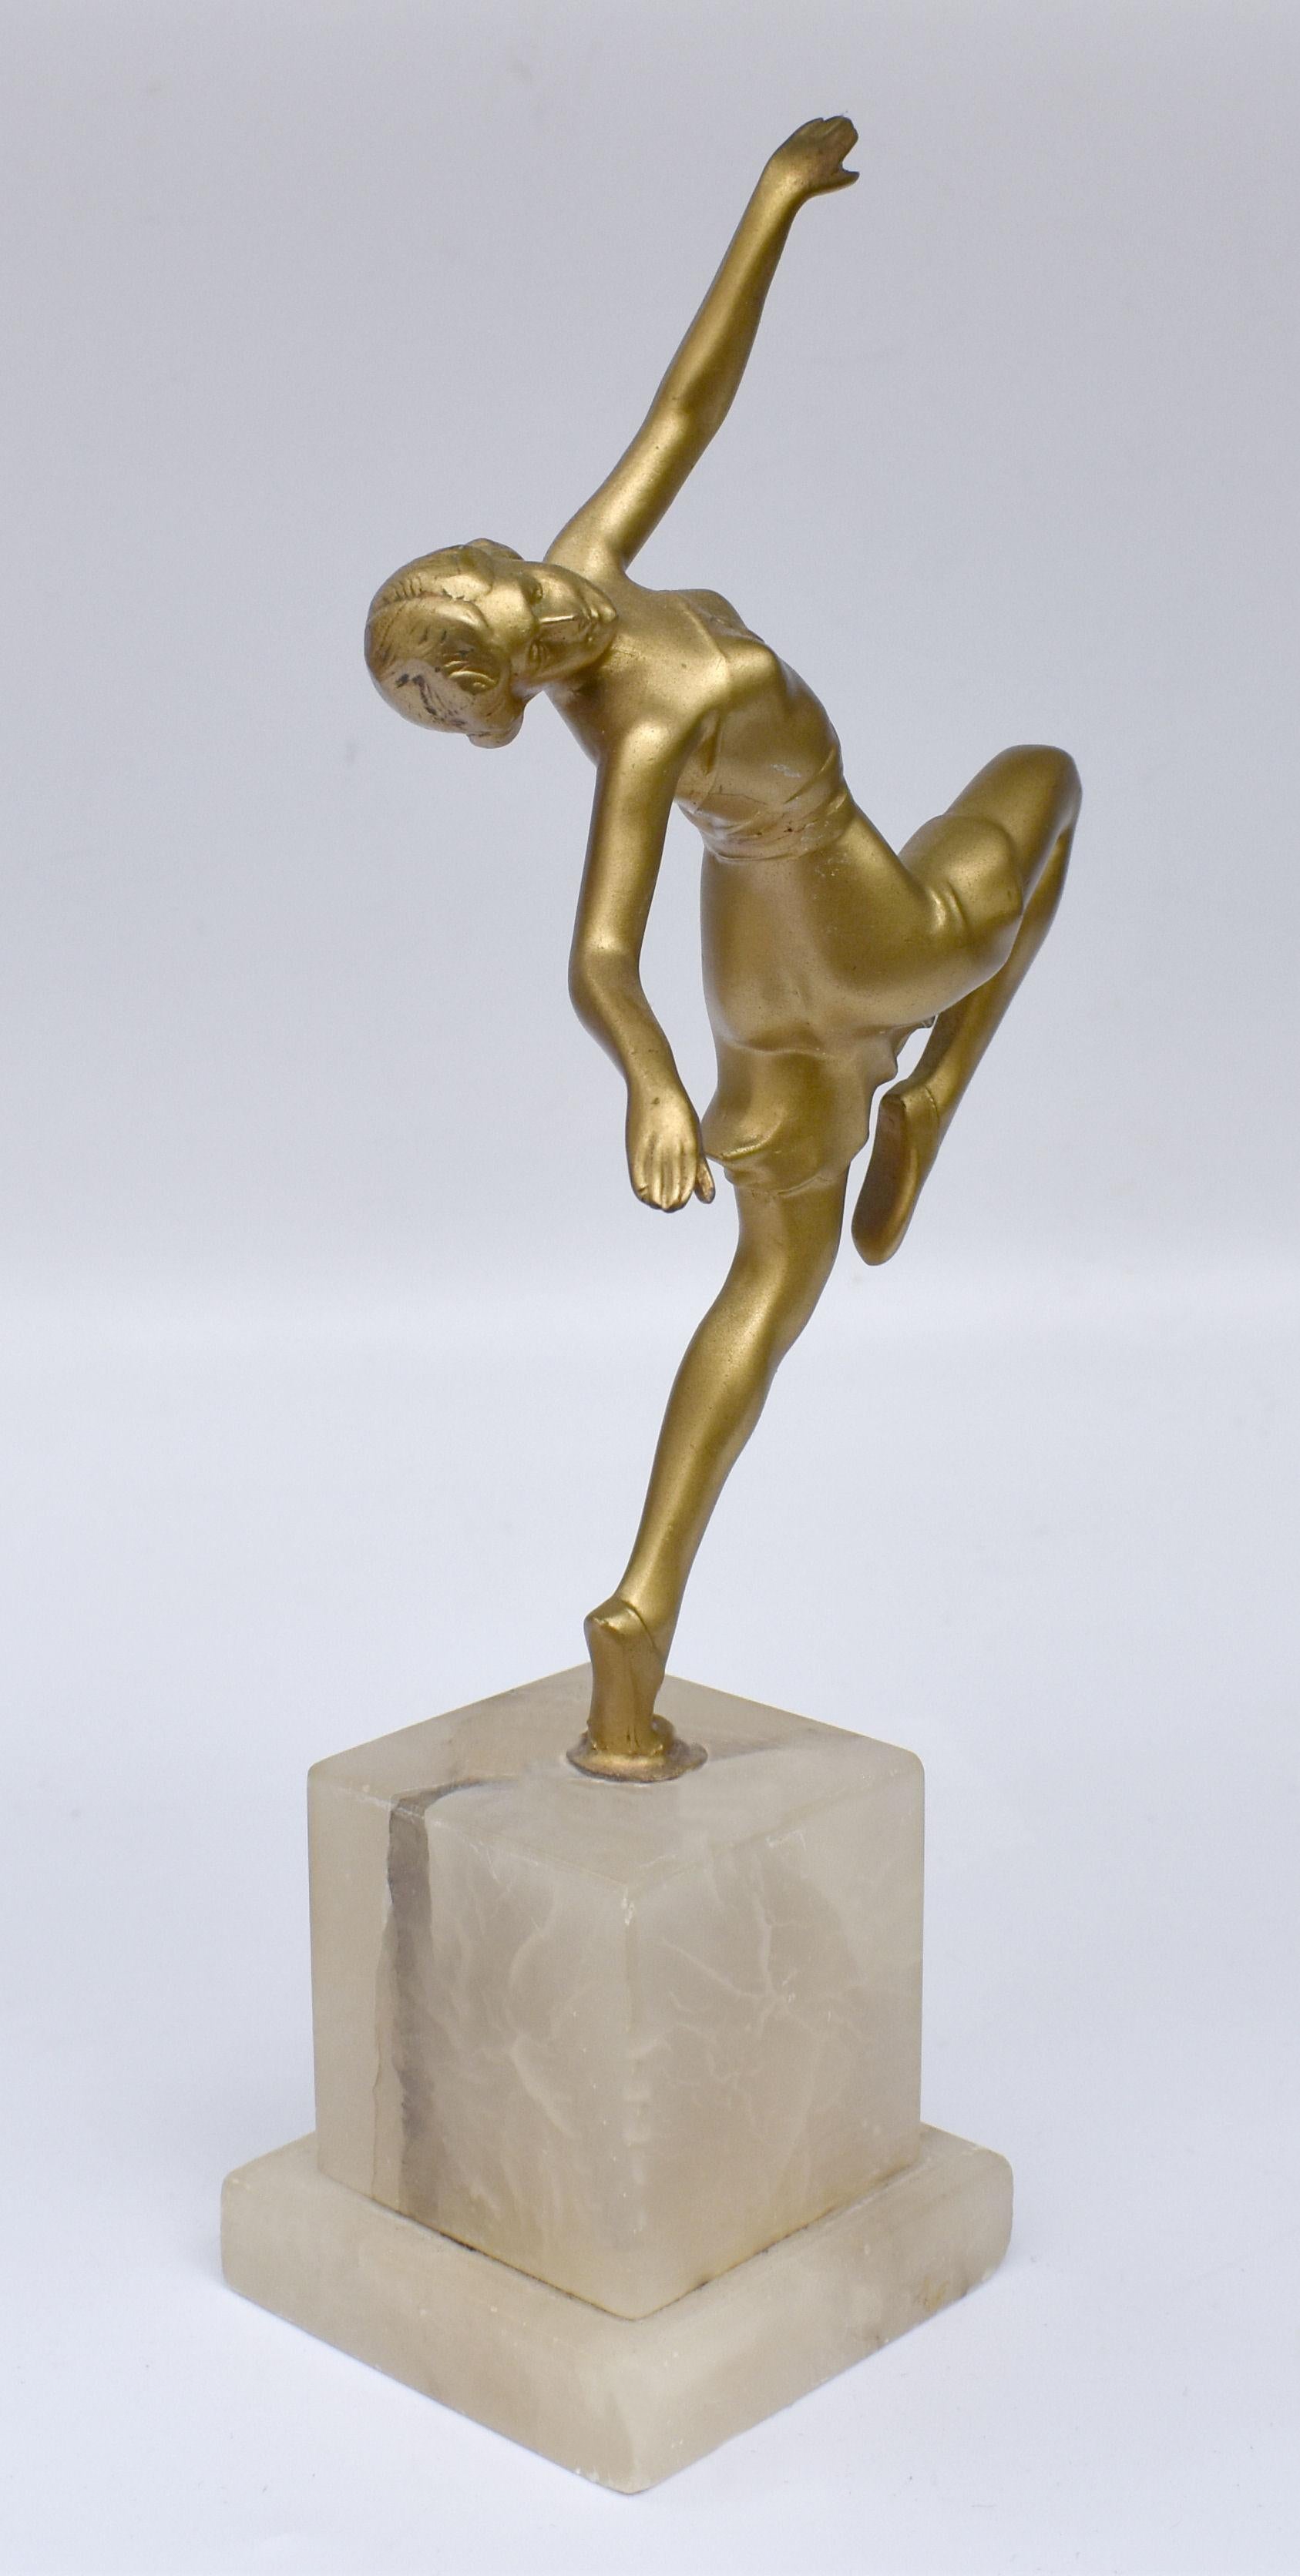 For your consideration is this wonderful 1930s Art Deco female dancer figure made from Spelter and gilded on top. She rests on an onyx base and stands 25 cm tall so a good height for display. Beautifully detailed and good condition, all fingers and